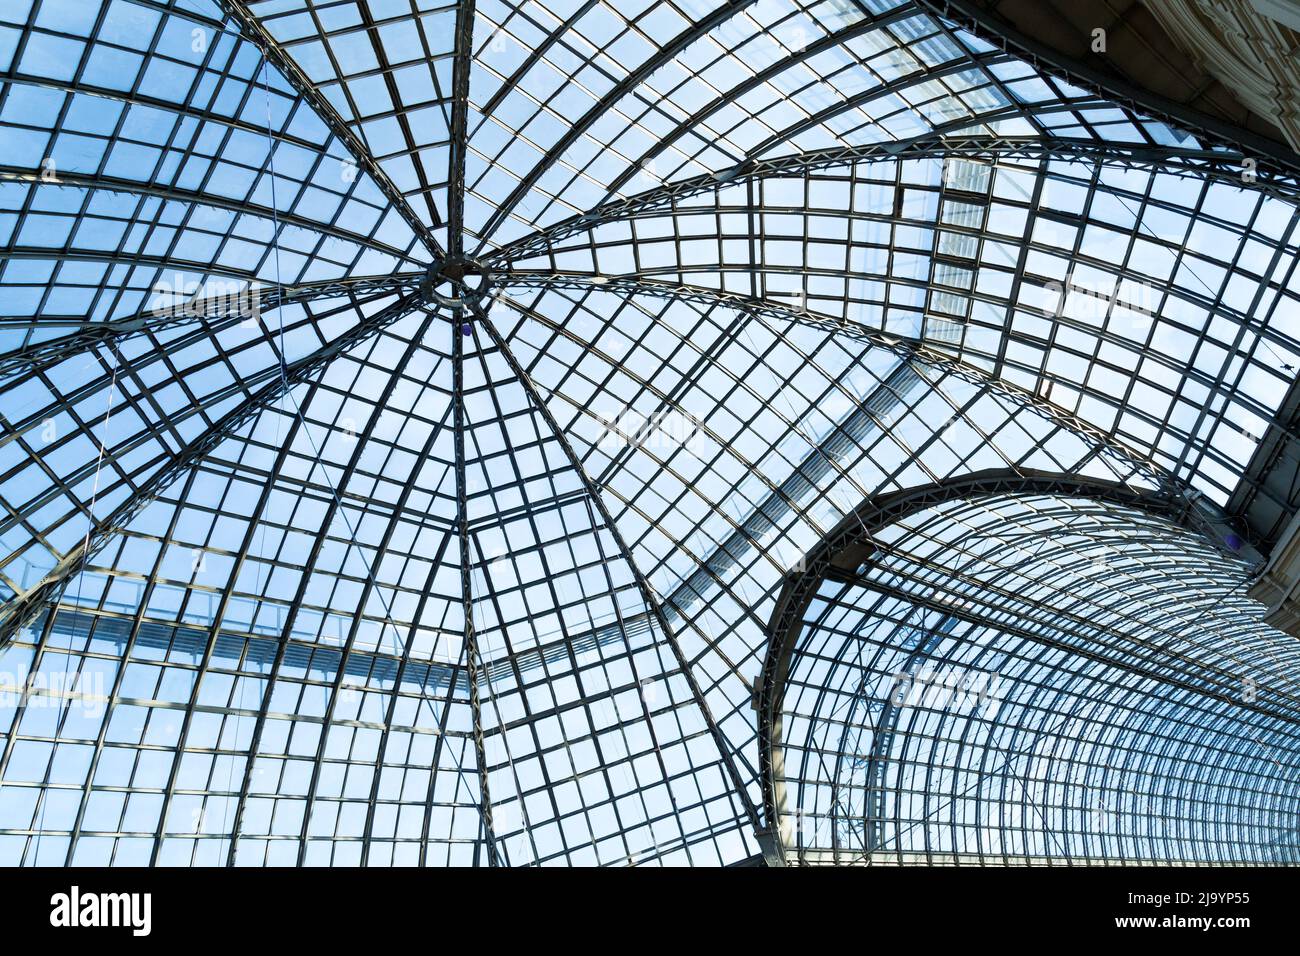 Glass roof dome provides light through, heat dissipation. Stock Photo